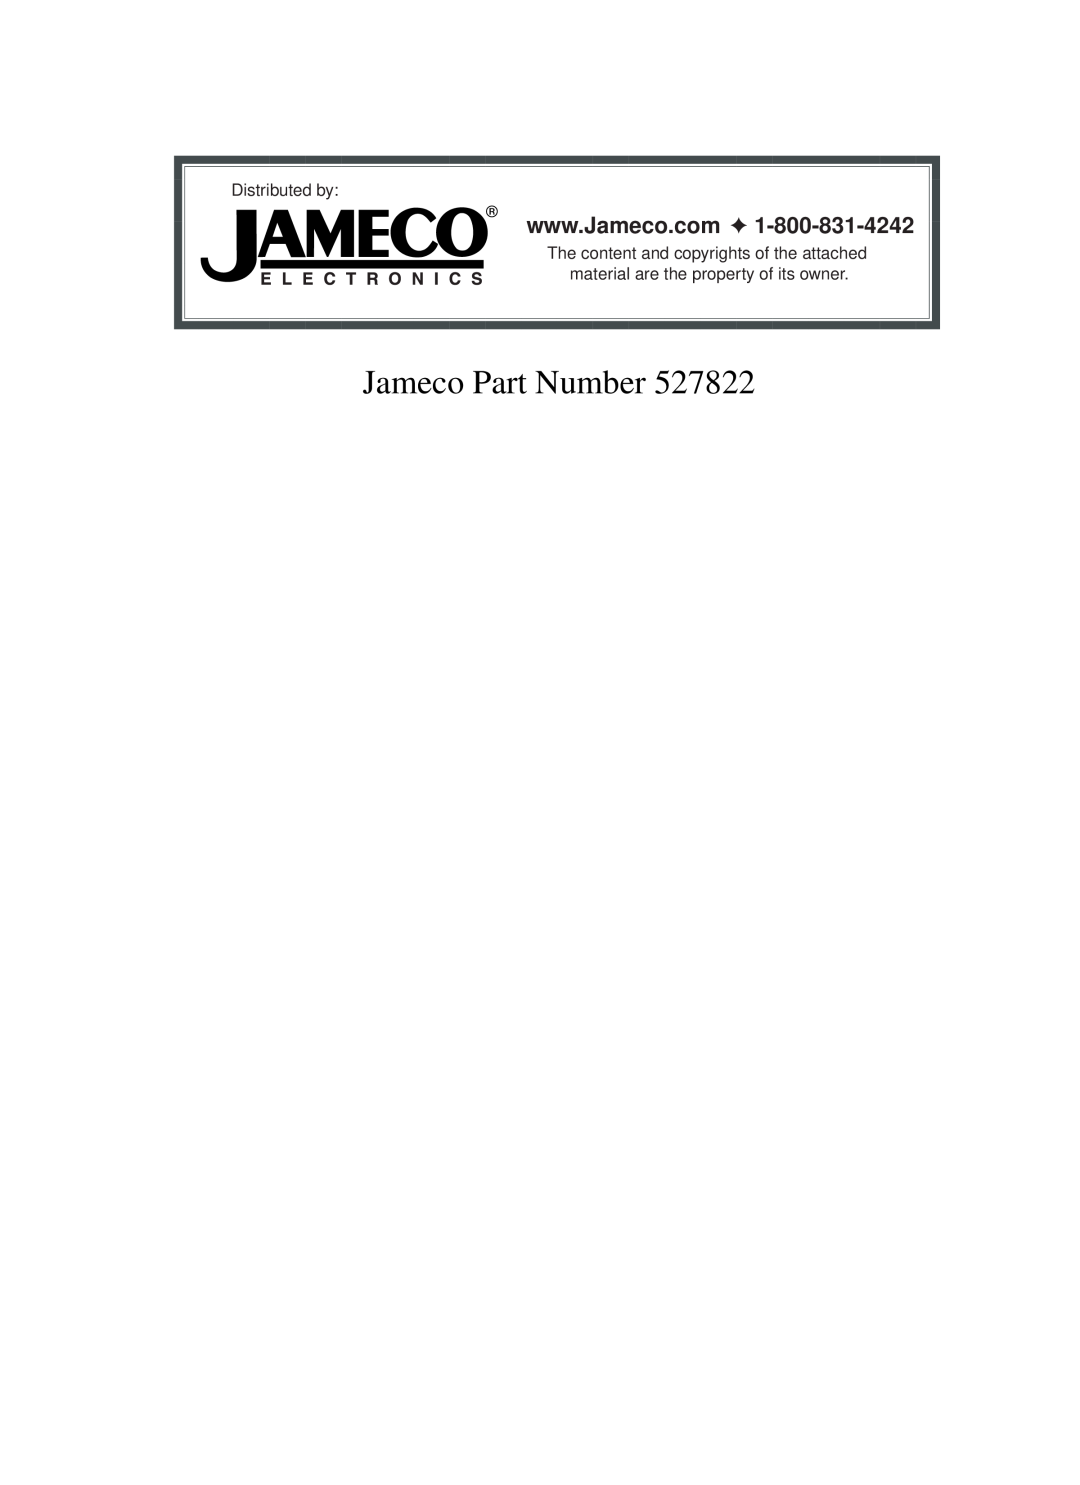 Jameco Electronics 527822 manual Jameco Part Number, Distributed by 